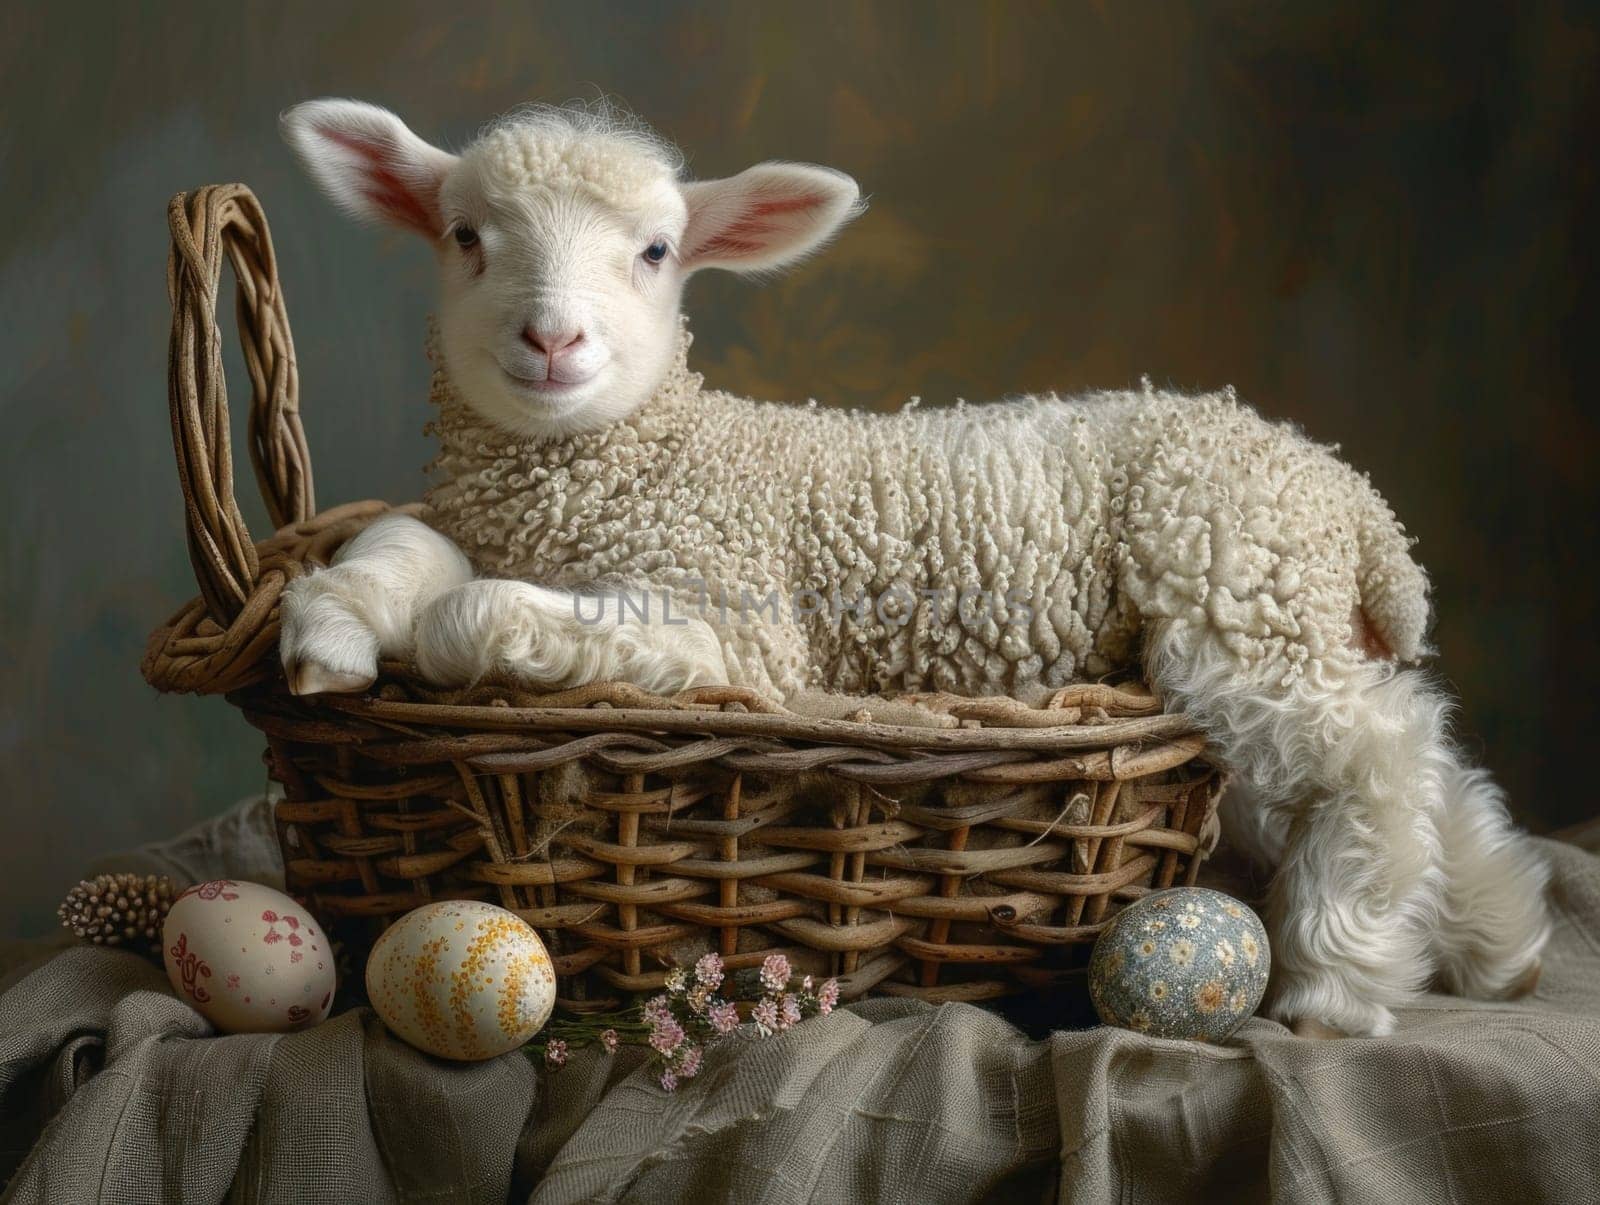 Sheep Resting in Basket With Easter Eggs by but_photo